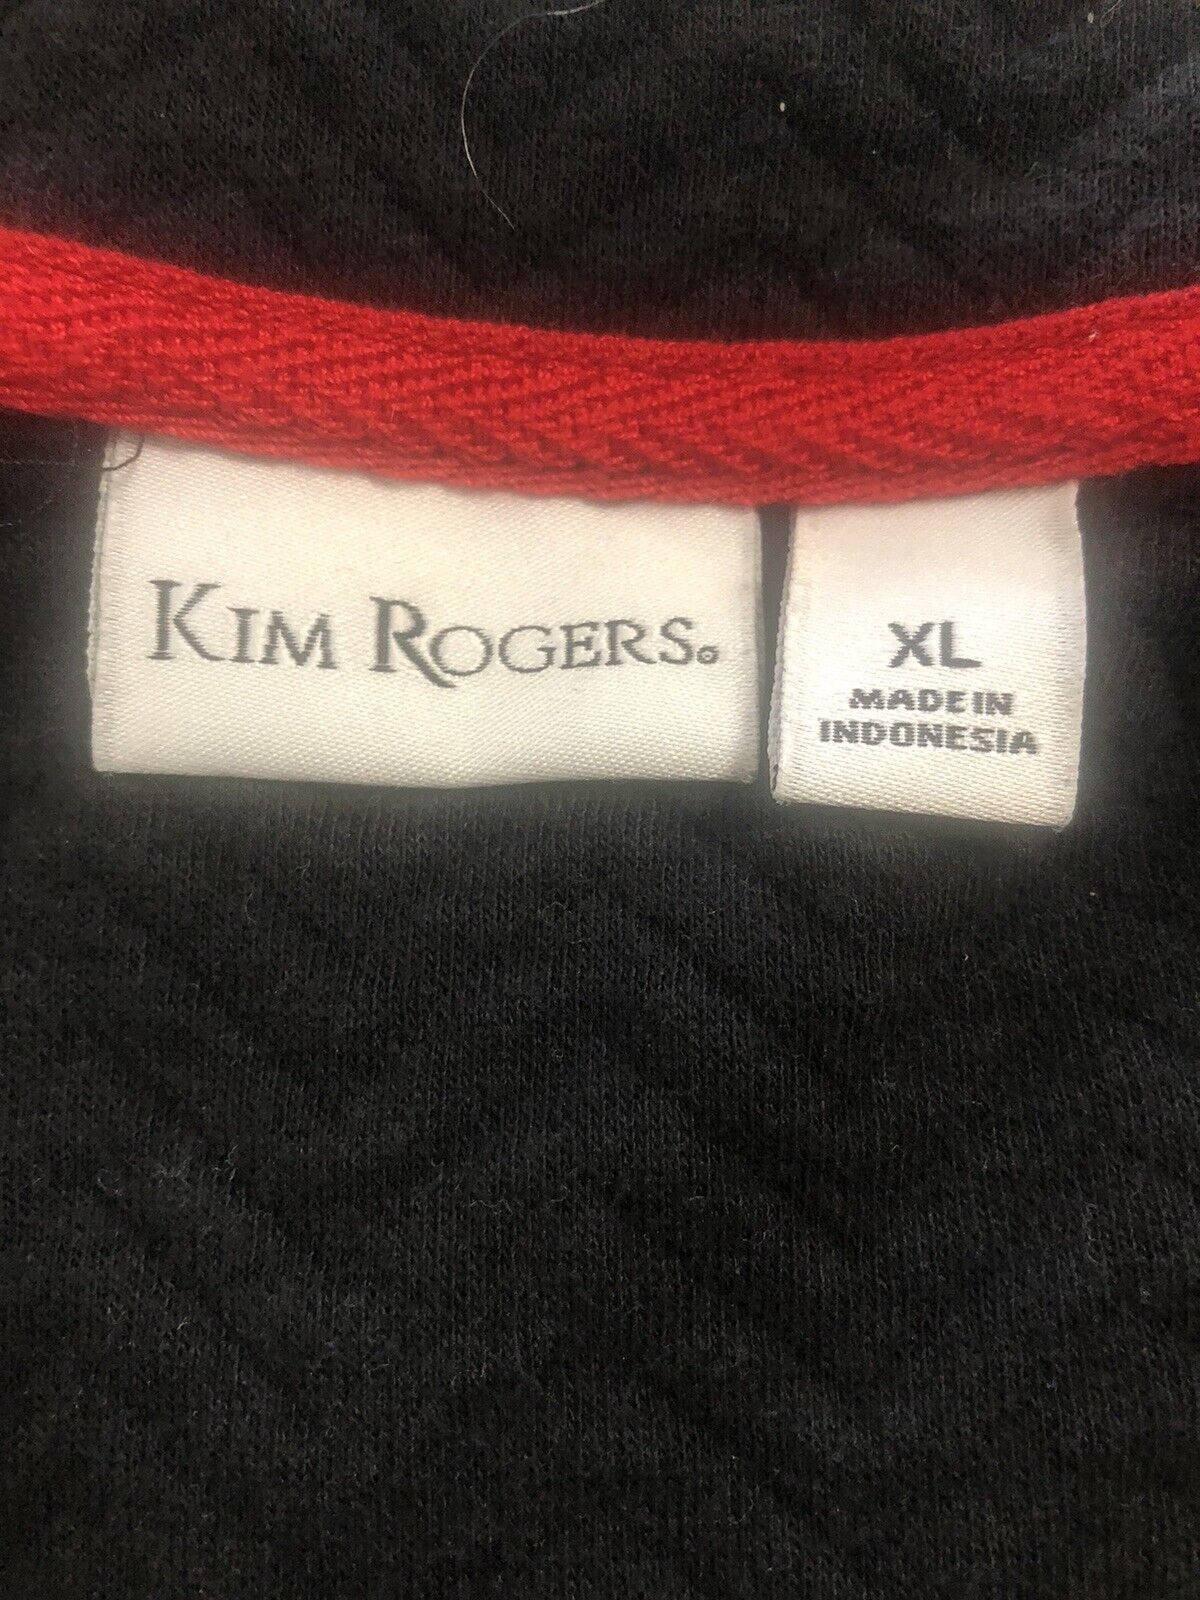 Kim Rogers Vest Quilted XLarge Inside pockets Zips Collared Women’s ...